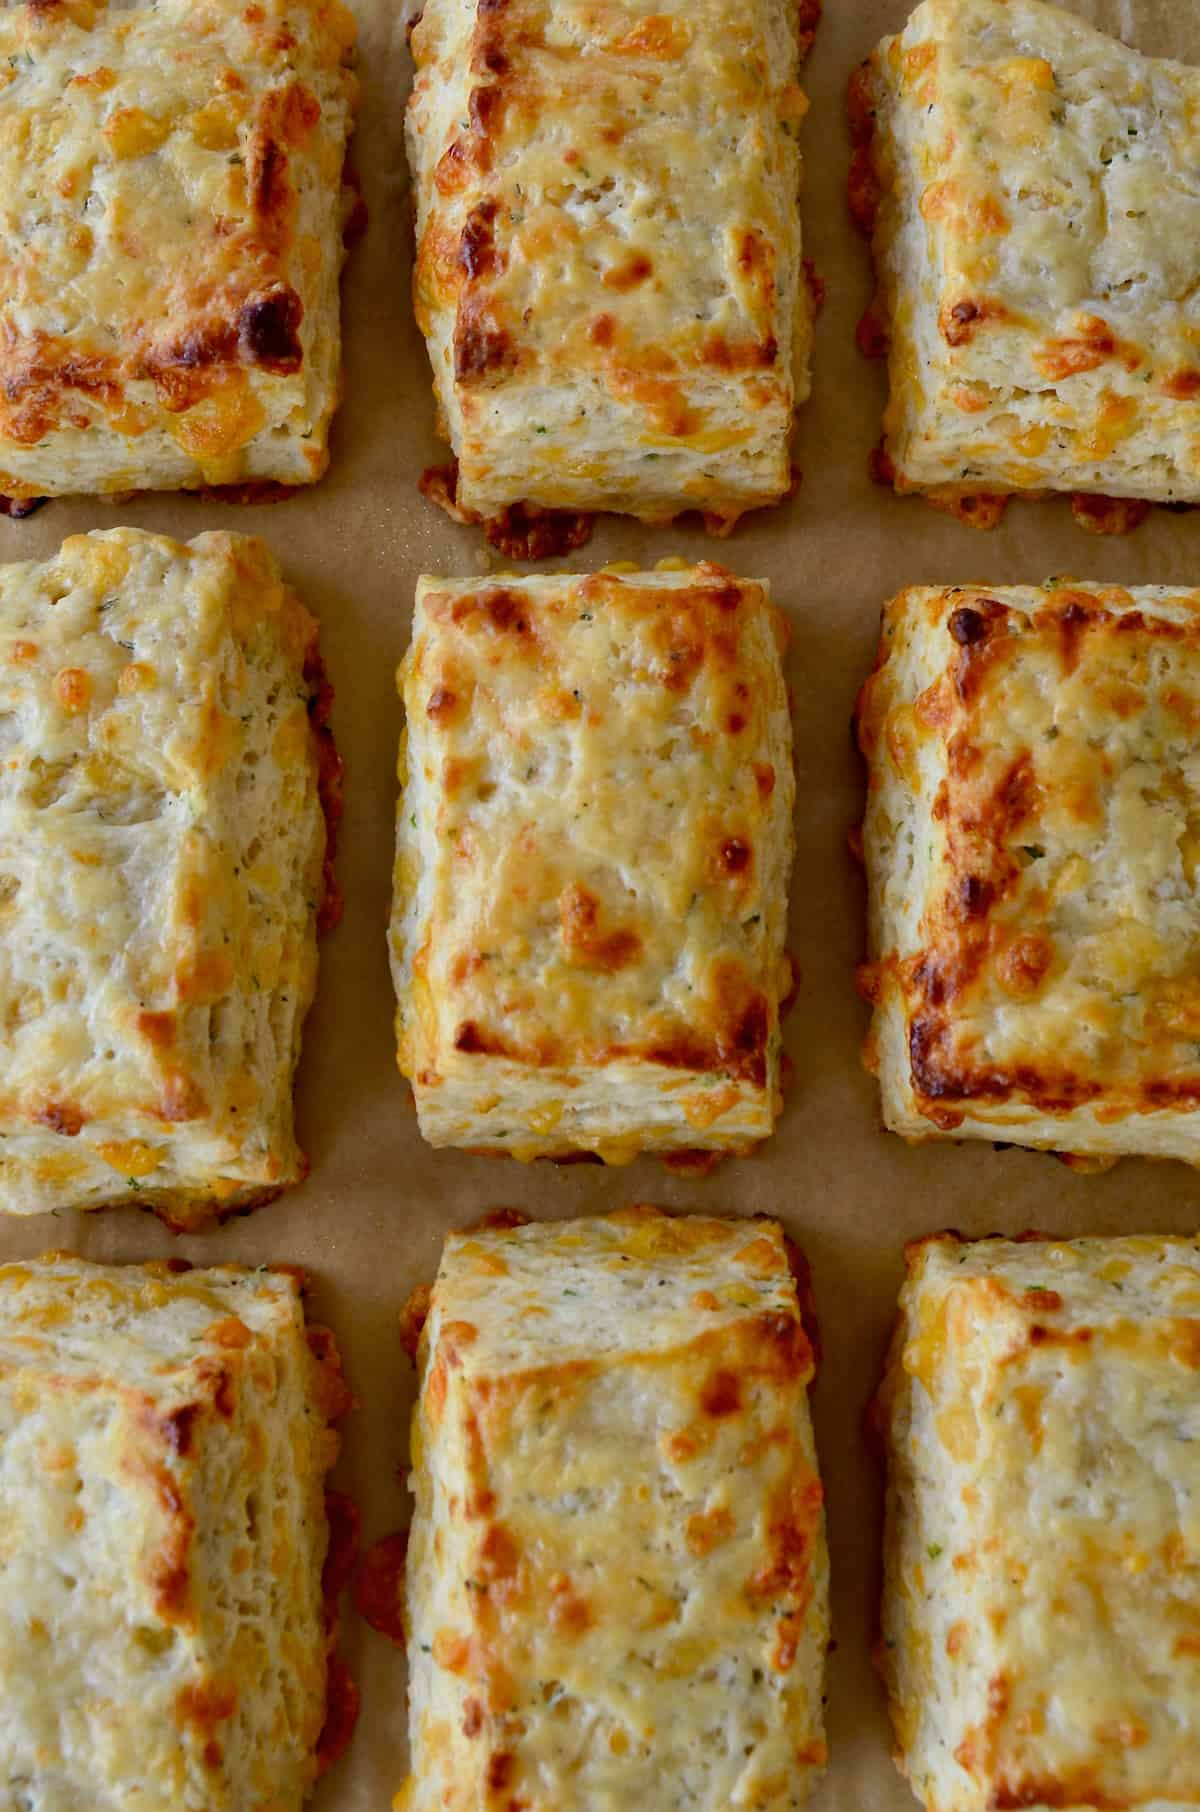 Rectangular cheddar biscuits are arranged in rows on brown parchment paper.